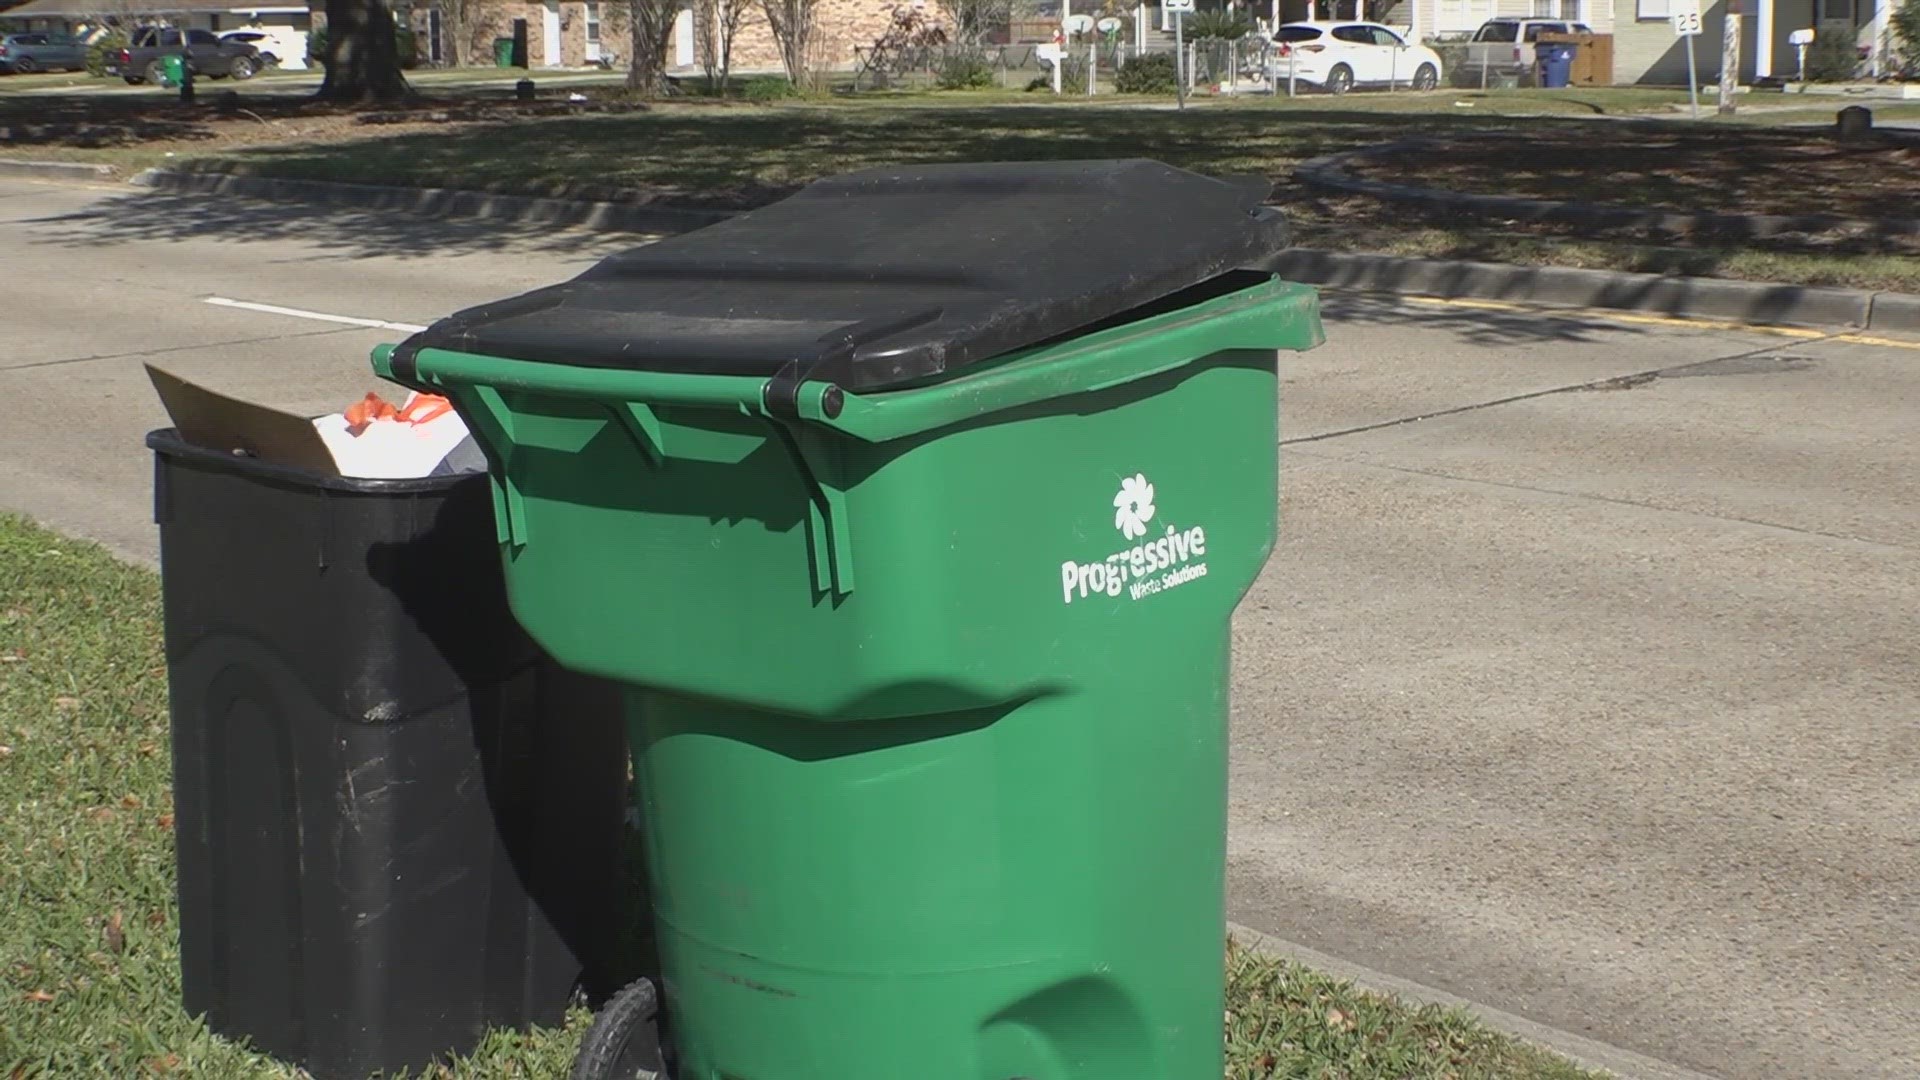 WWL Louisiana reporter Lily Cummings explains what residents in Jefferson Parish can expect regarding trash and recycling changes in the new year.